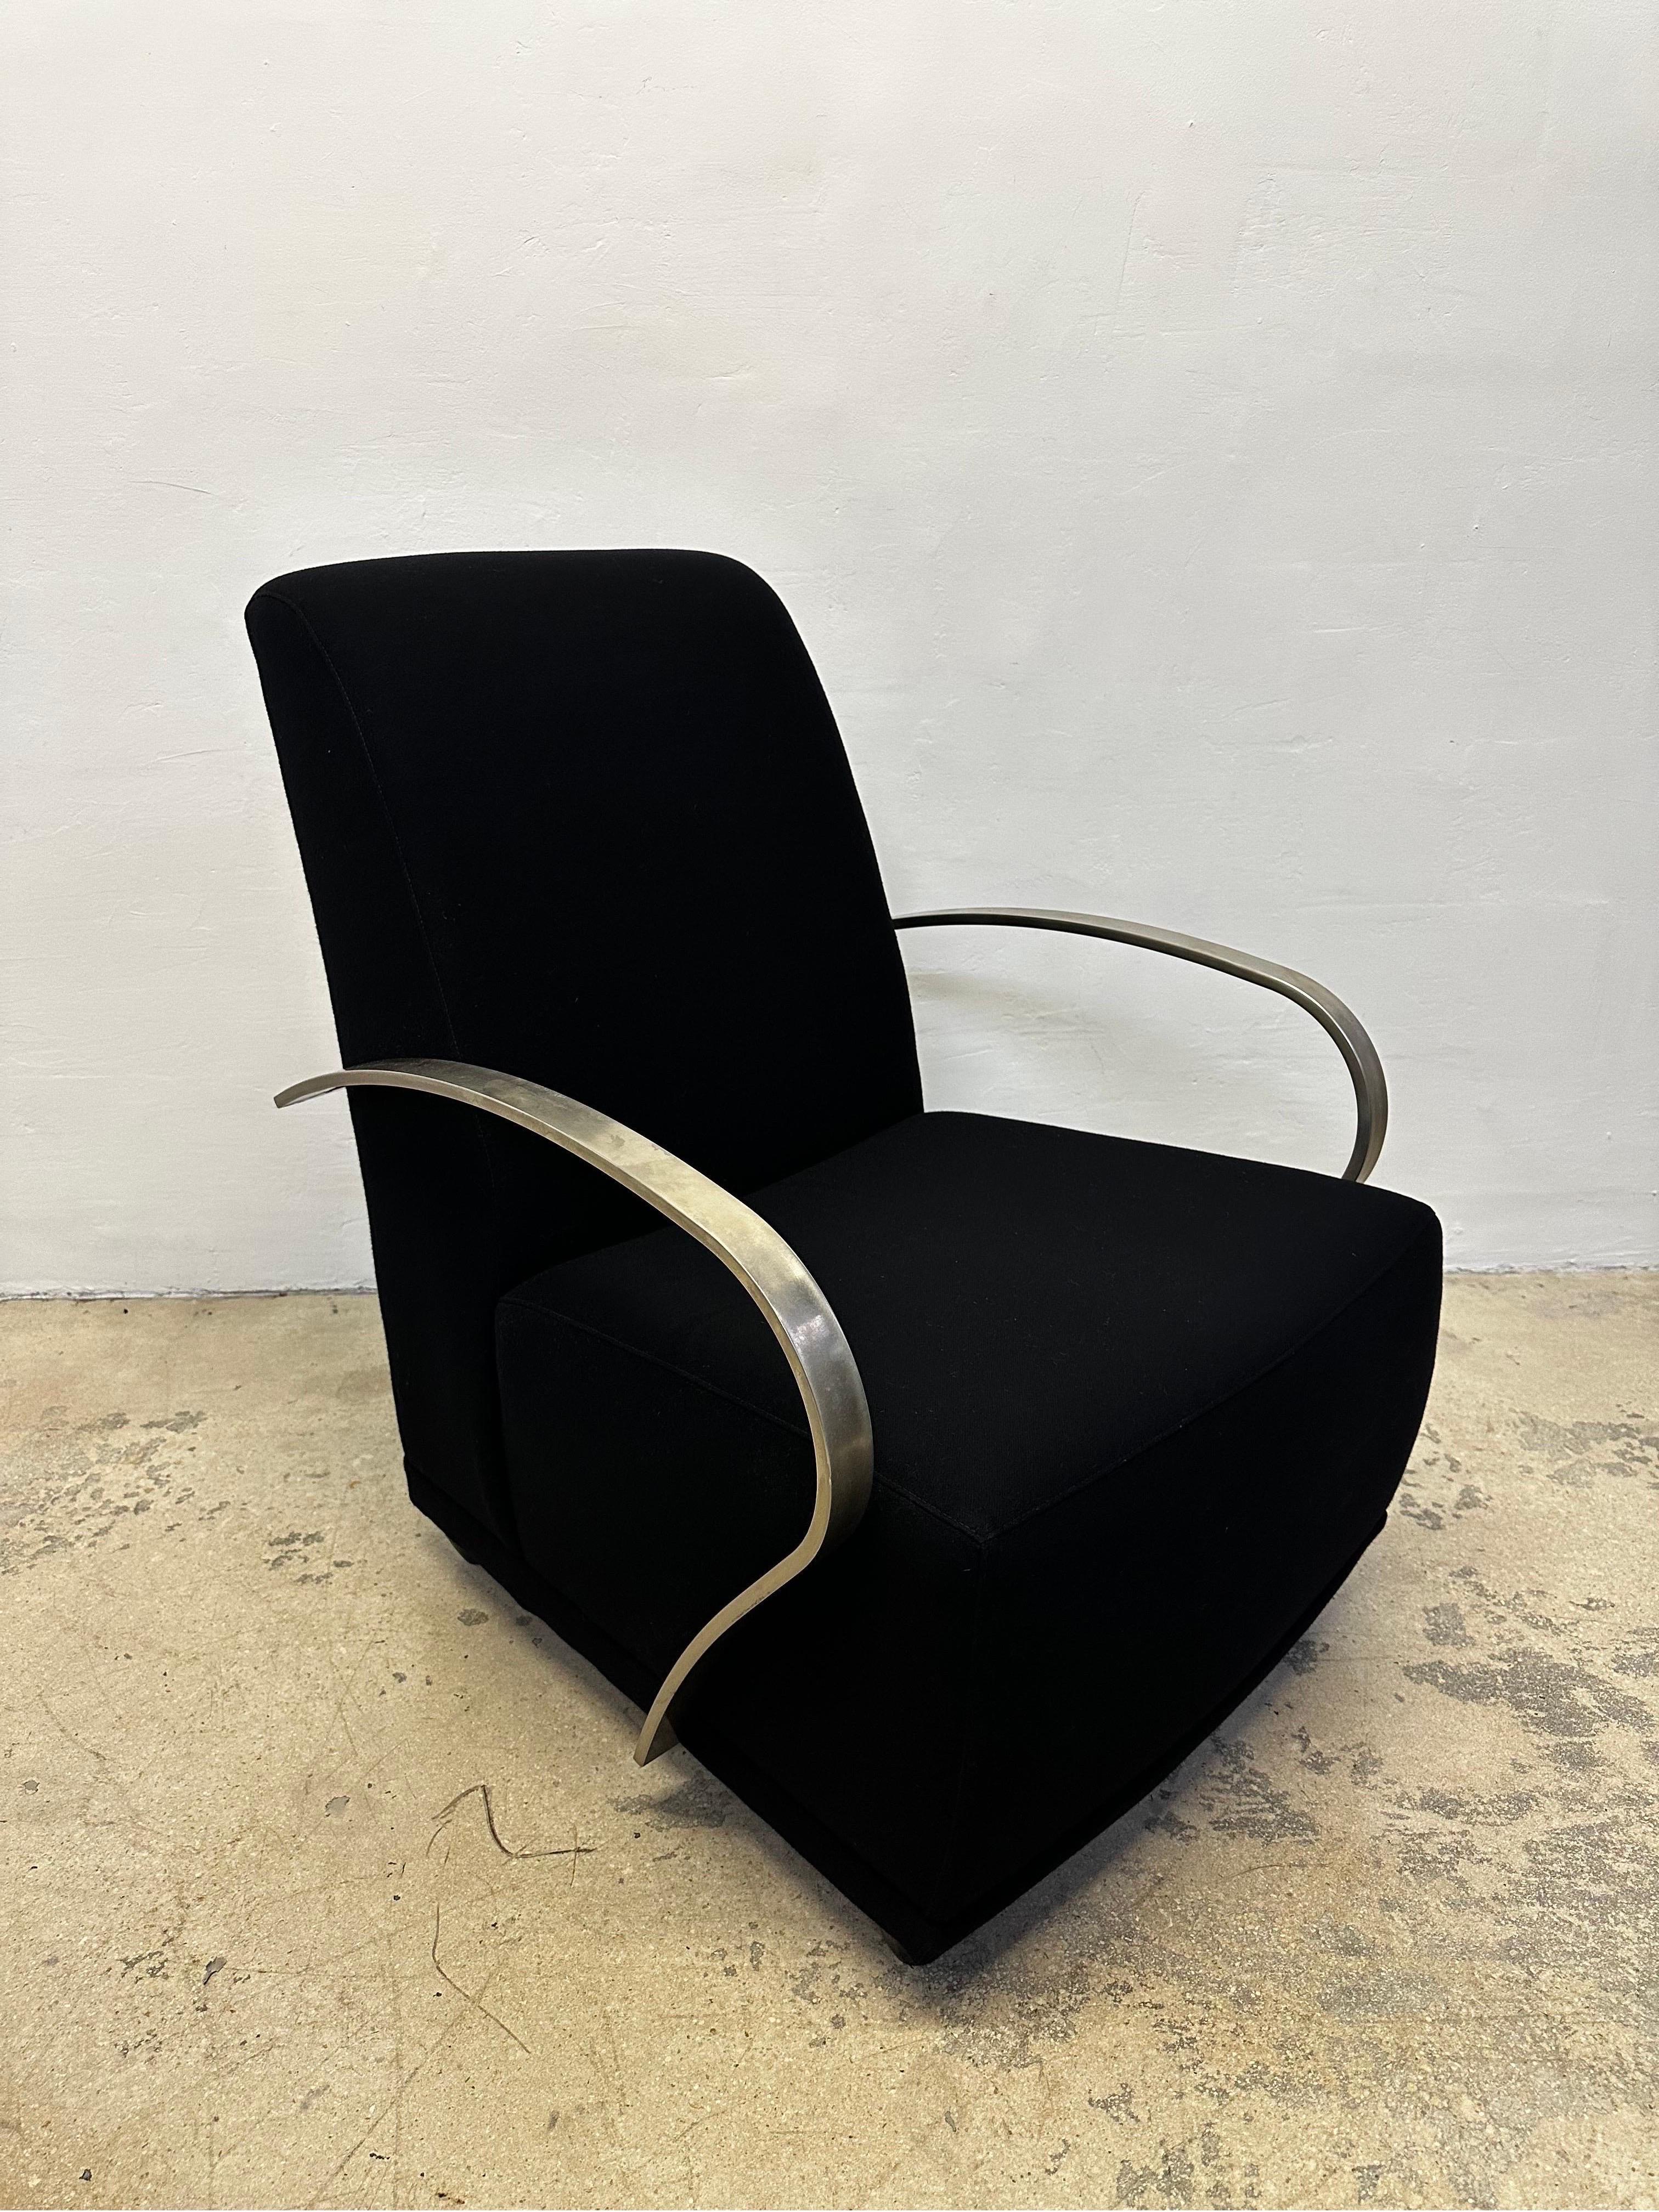 20th Century Art Deco Revival Black Lounge Chairs With Steel Arms by Directional - a Pair For Sale